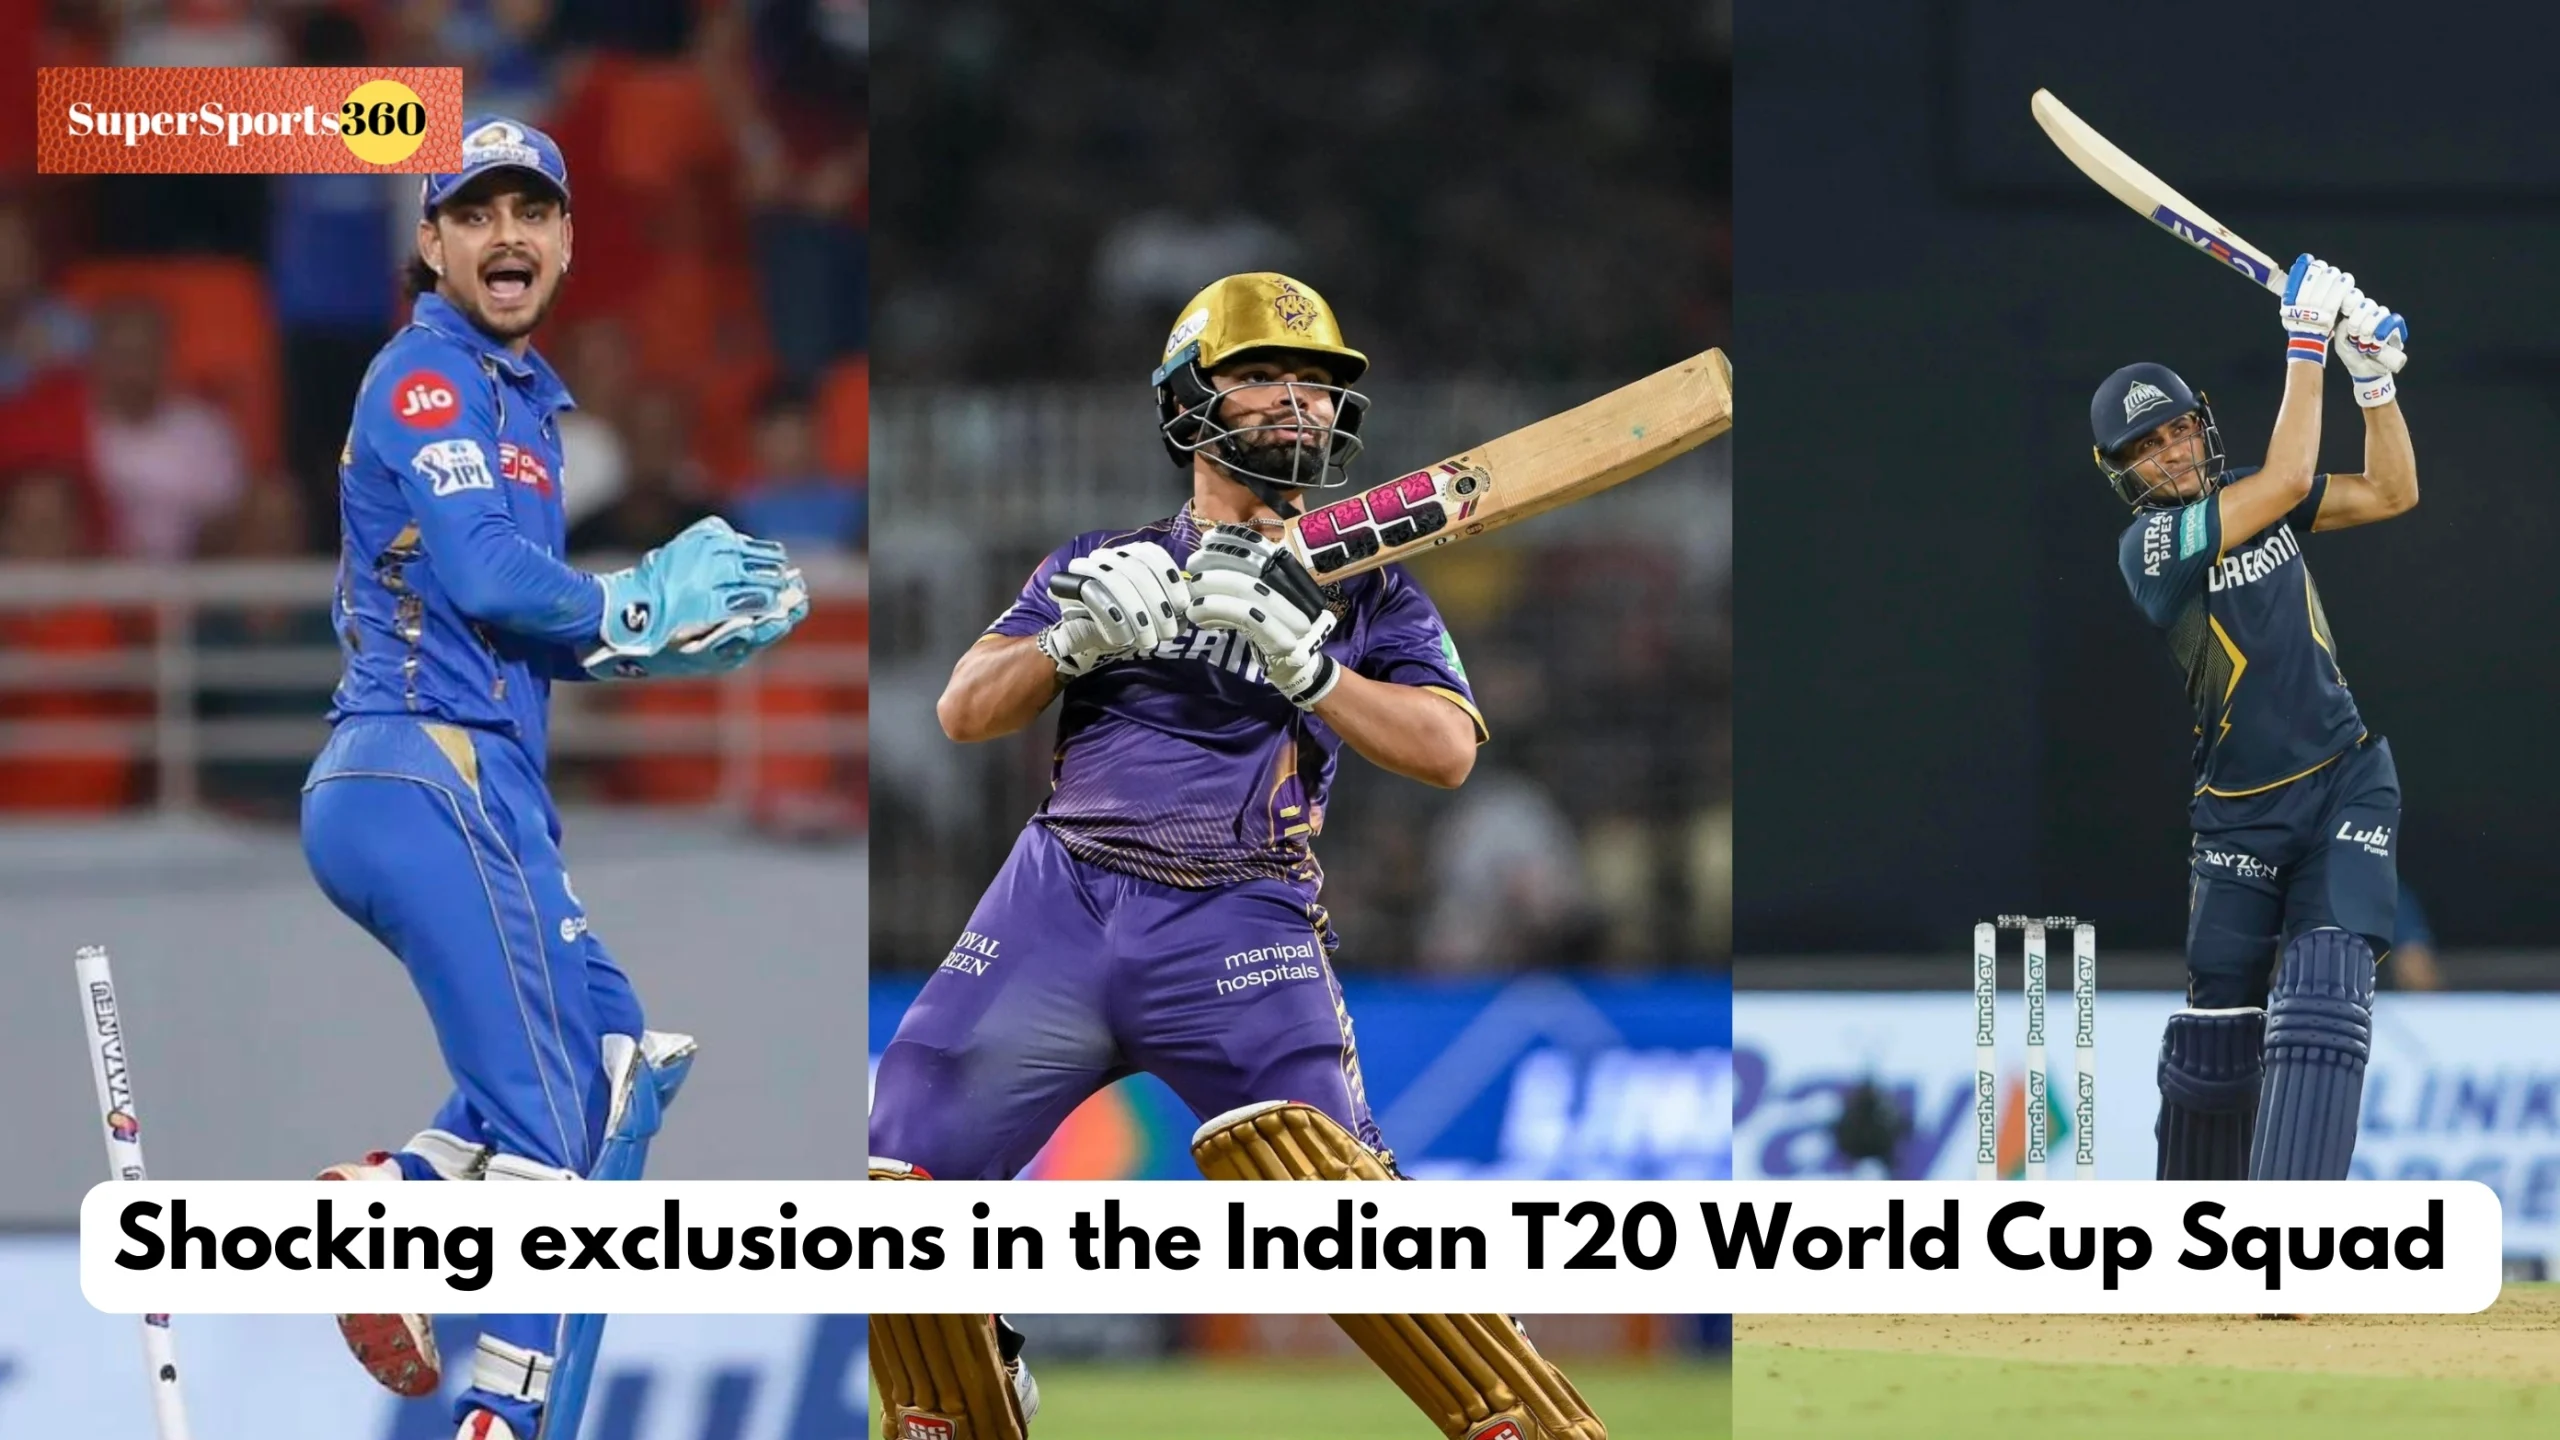 Shocking exclusions in the Indian T20 World Cup Squad